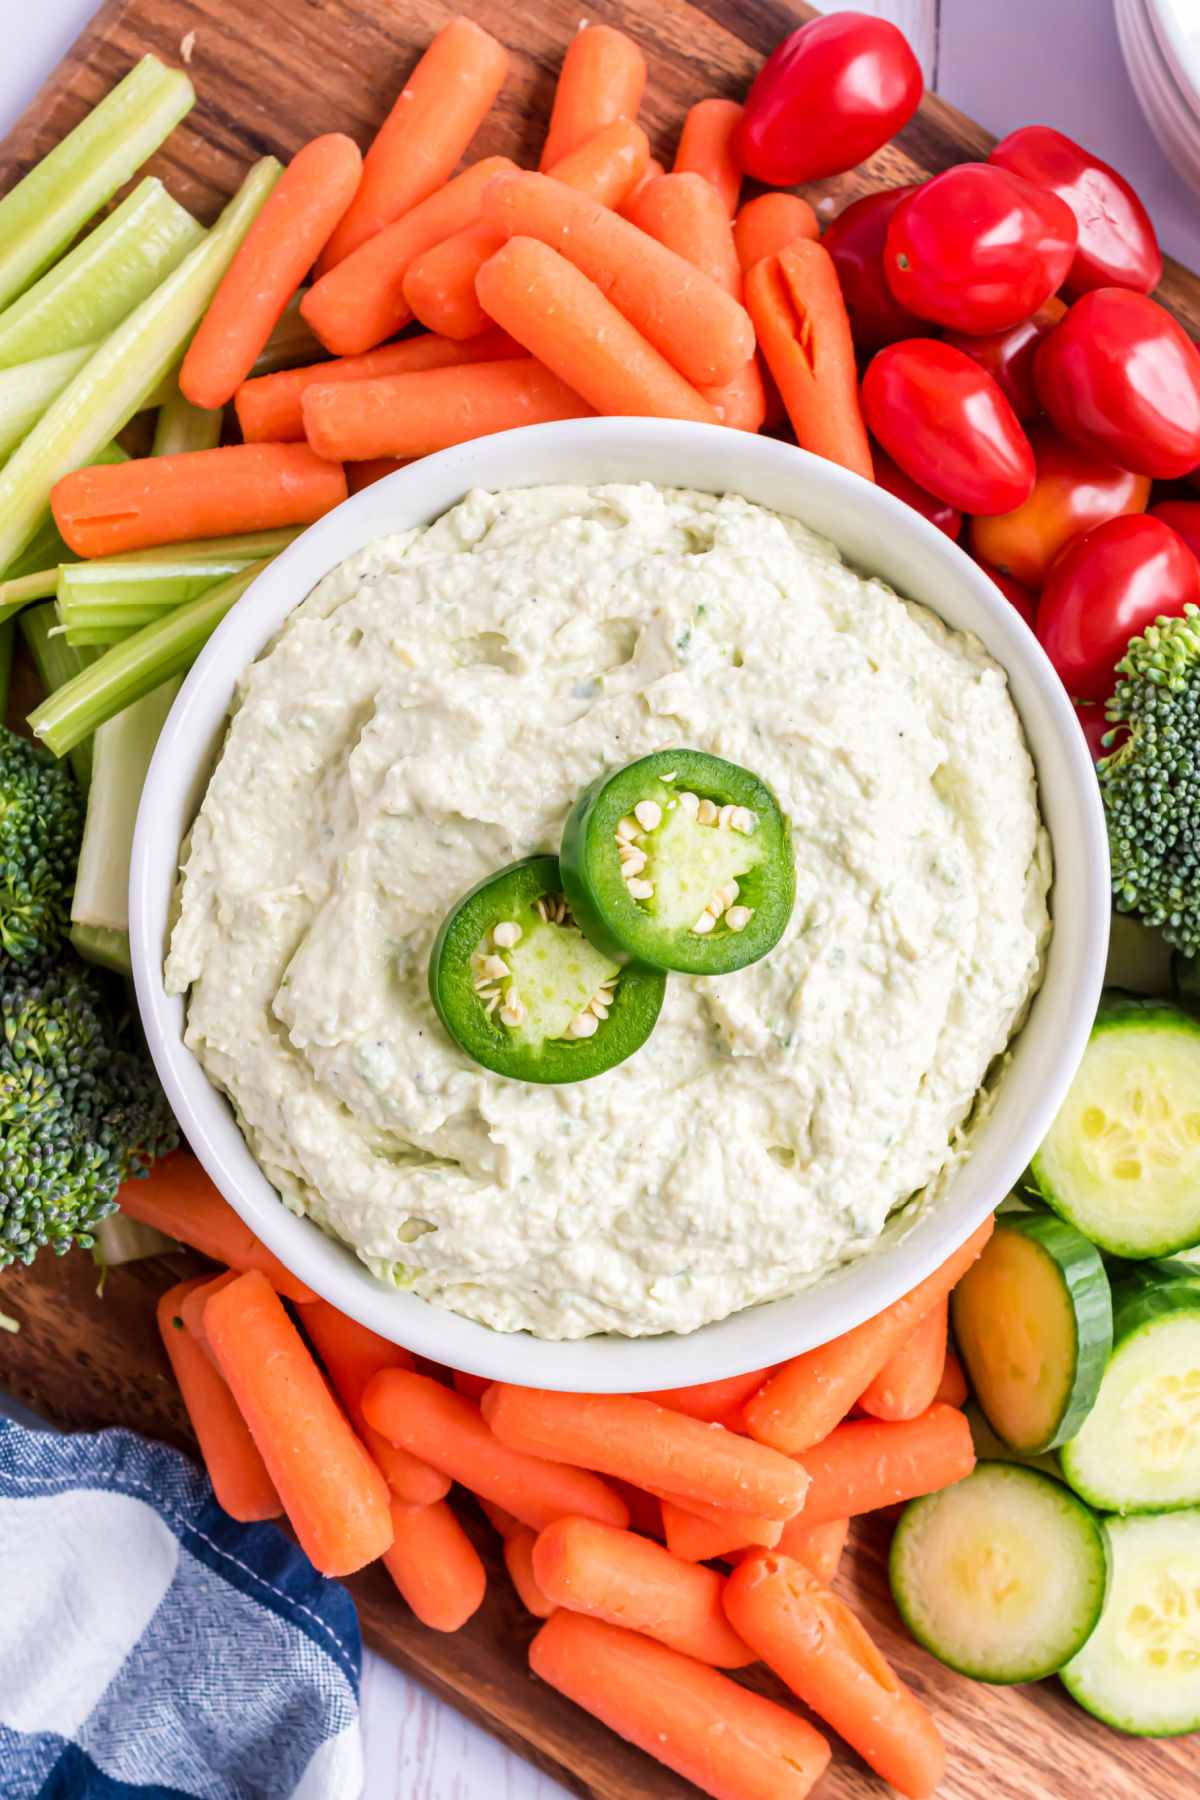 Jalapeno artichoke dip served in a white bowl with fresh vegetables.